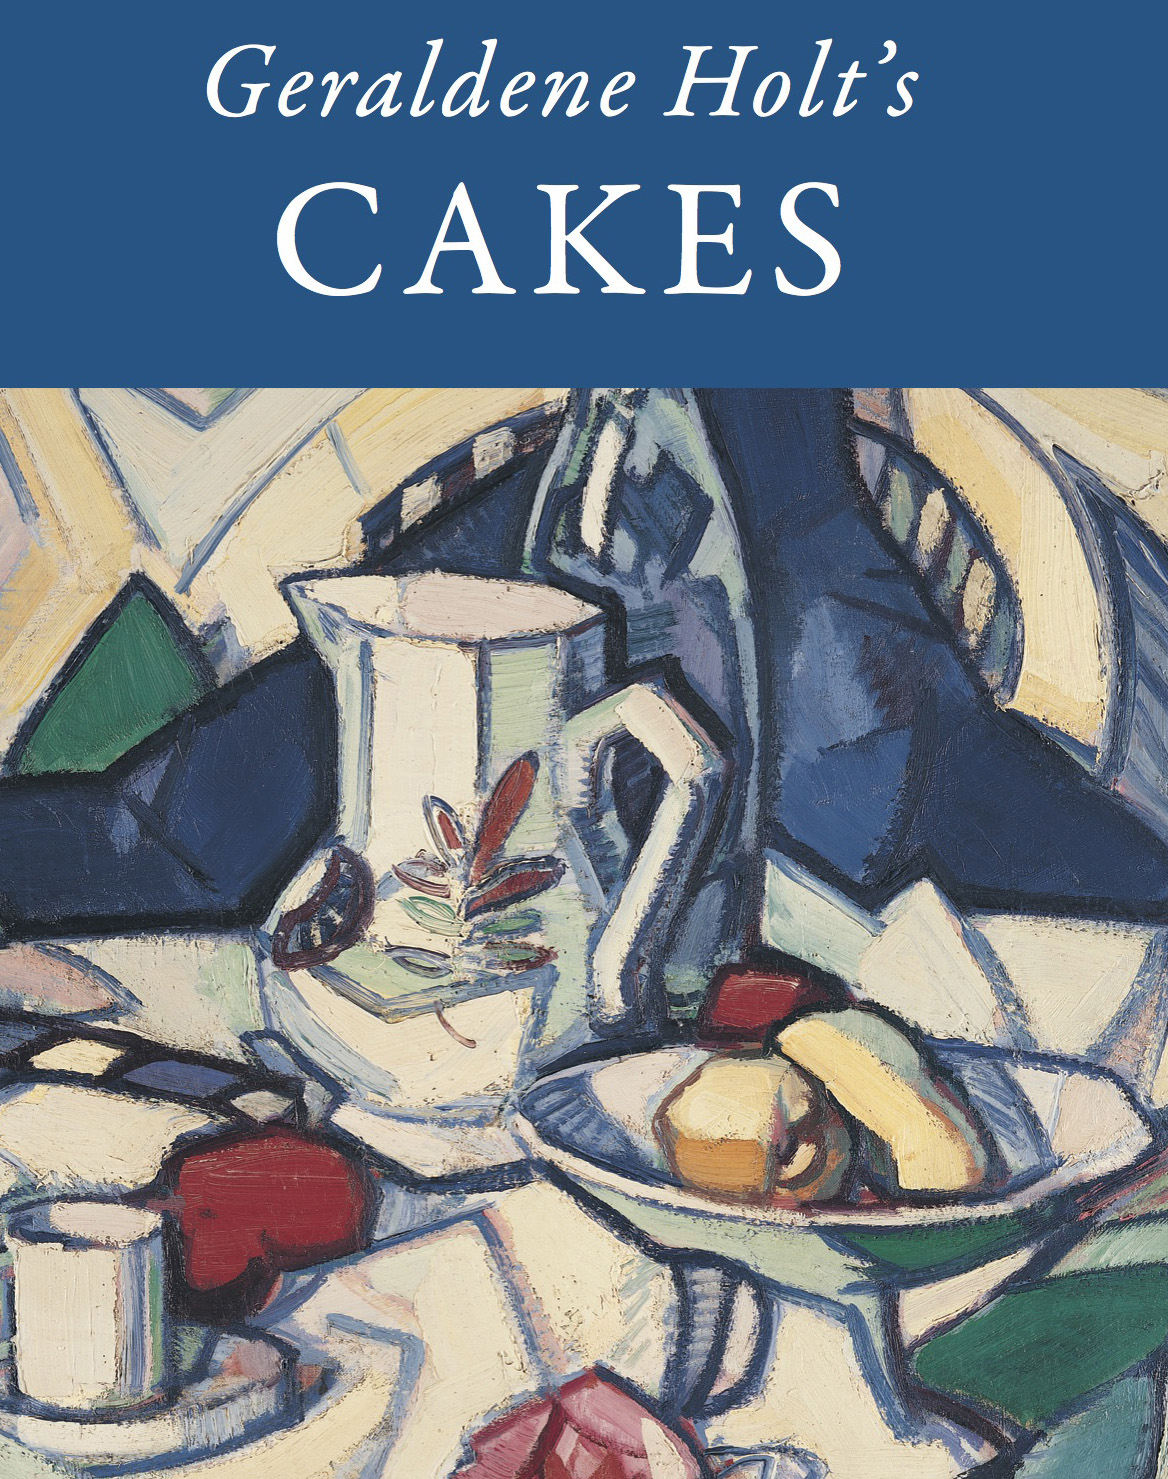 Cakes by Geraldine Holt